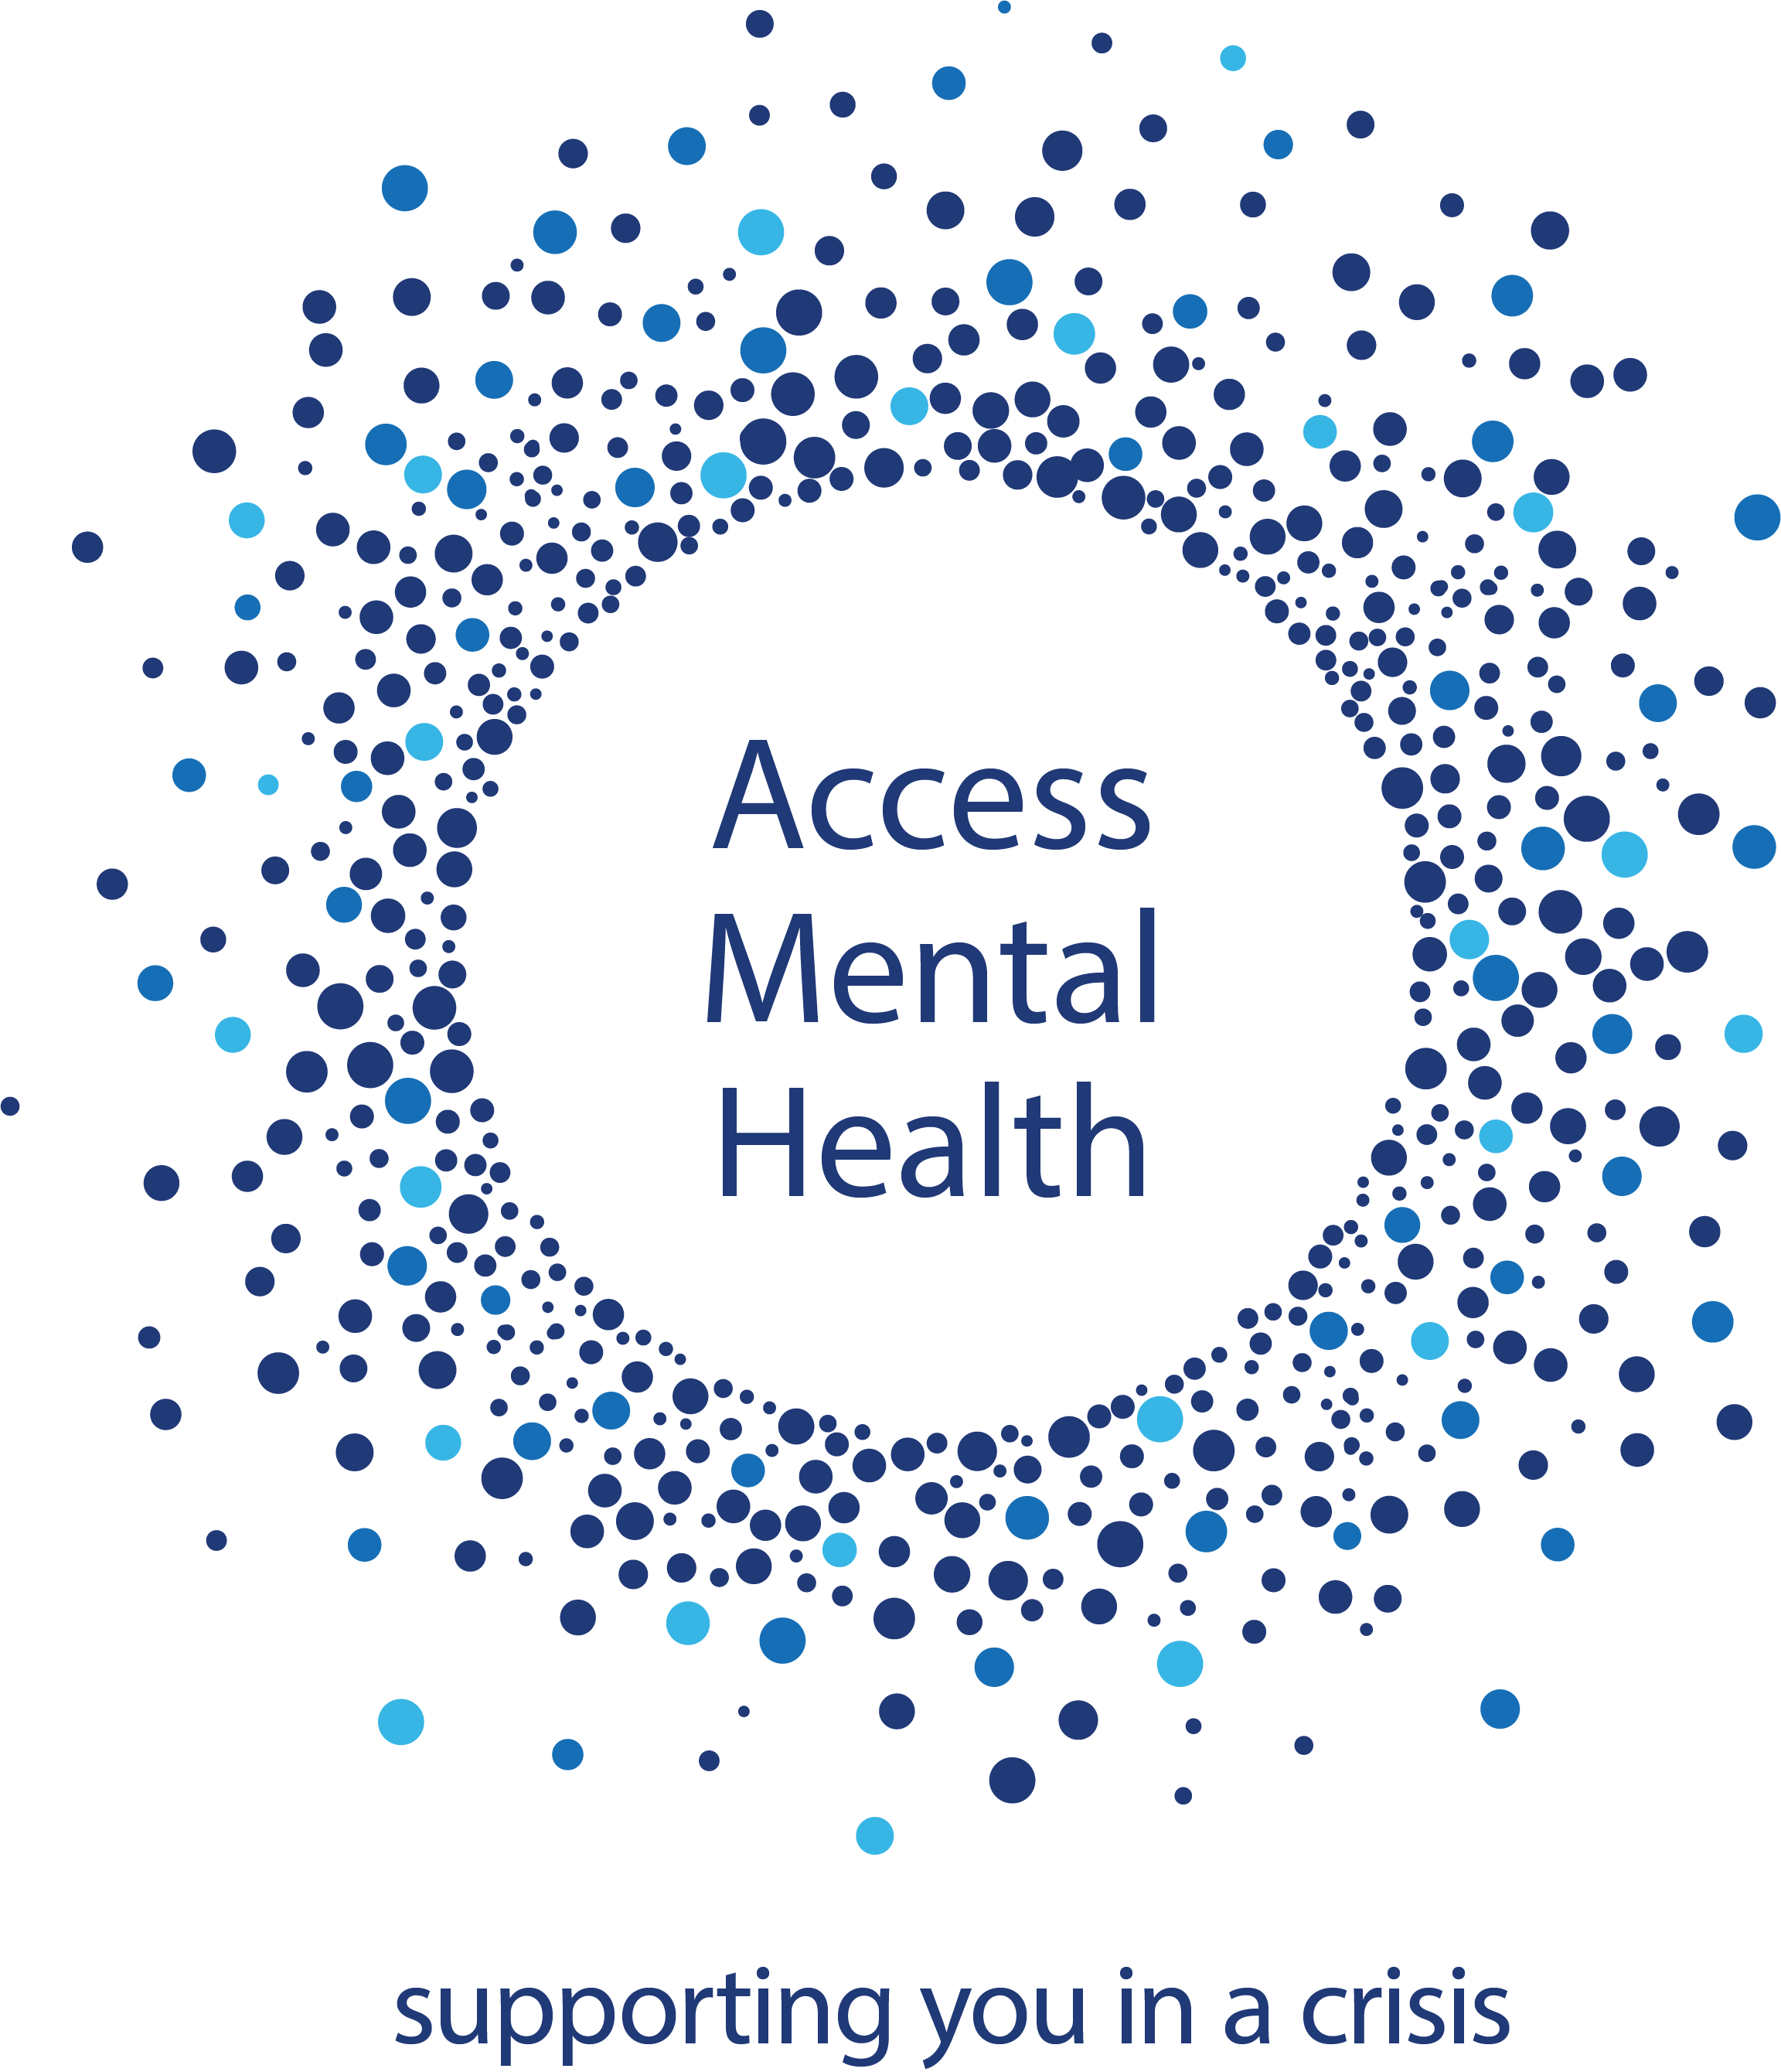 Access Mental Health - Supporting you in crisis logo graphic